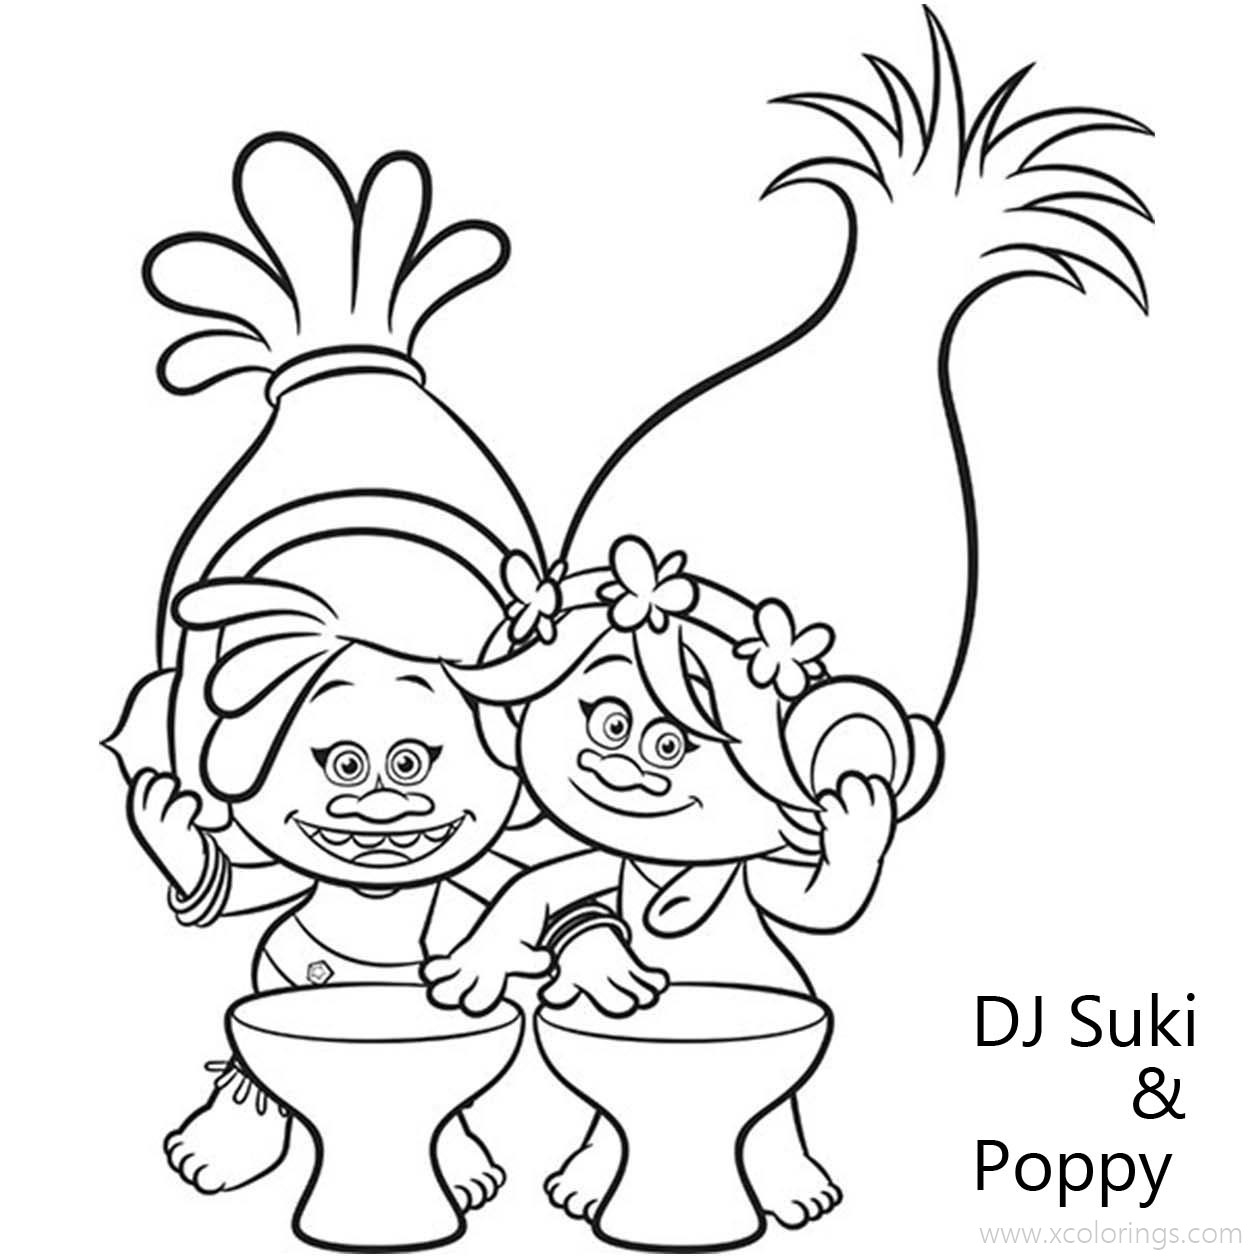 Free Trolls DJ Suki Coloring Pages with Poppy printable